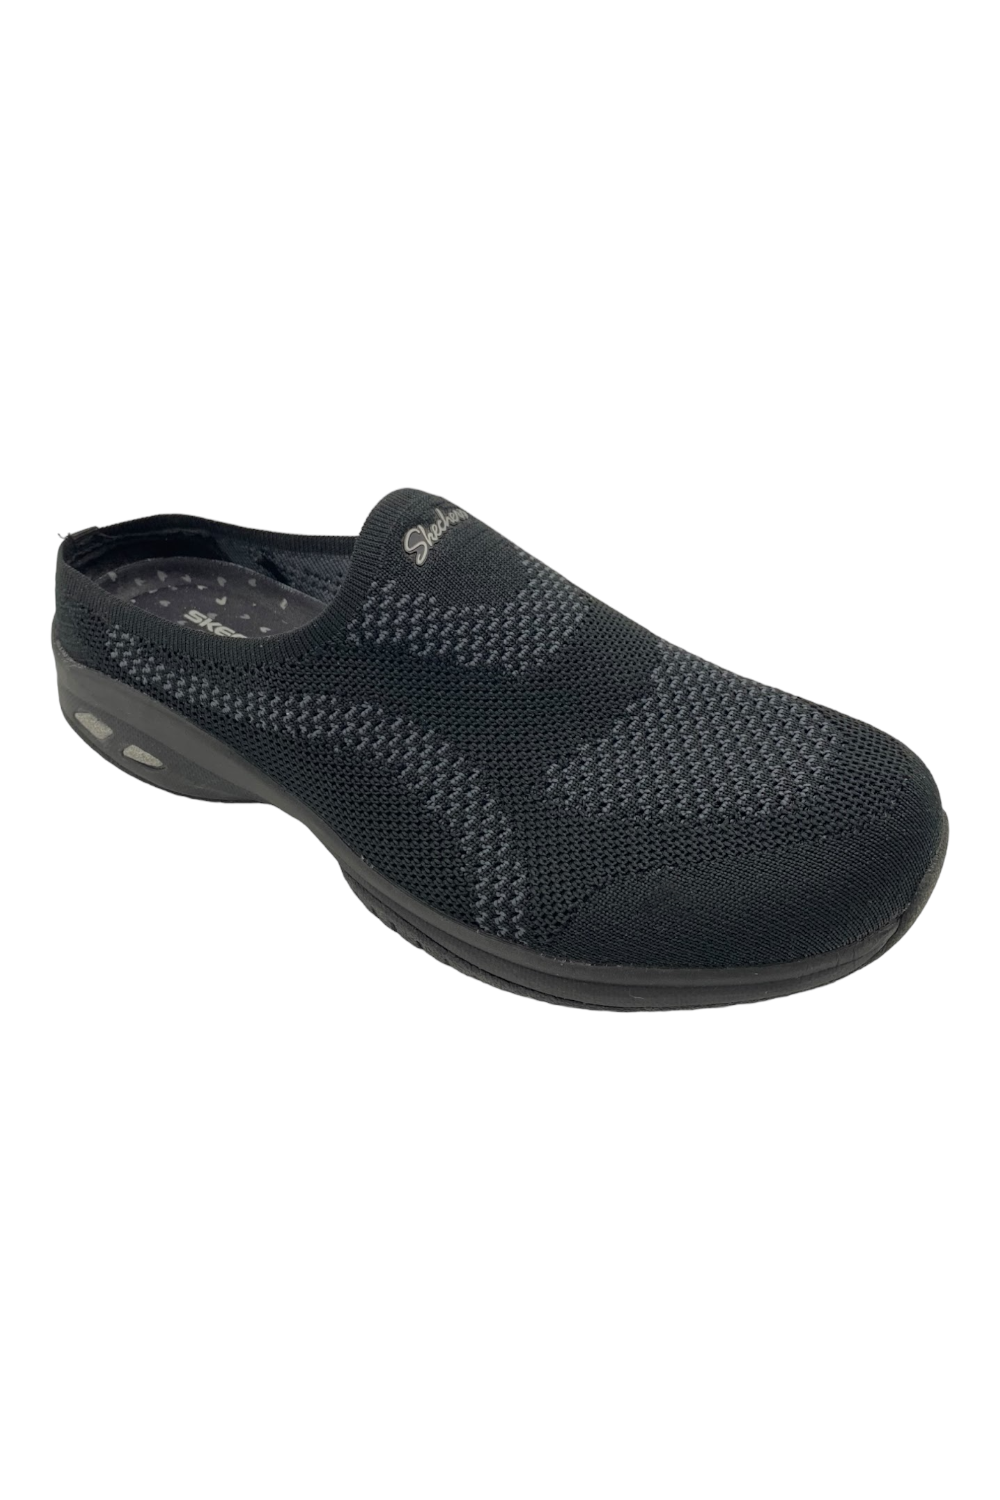 Refrescante Medio luto Skechers Commute Time Washable Knit Mules In Knit to Win Black | Jender